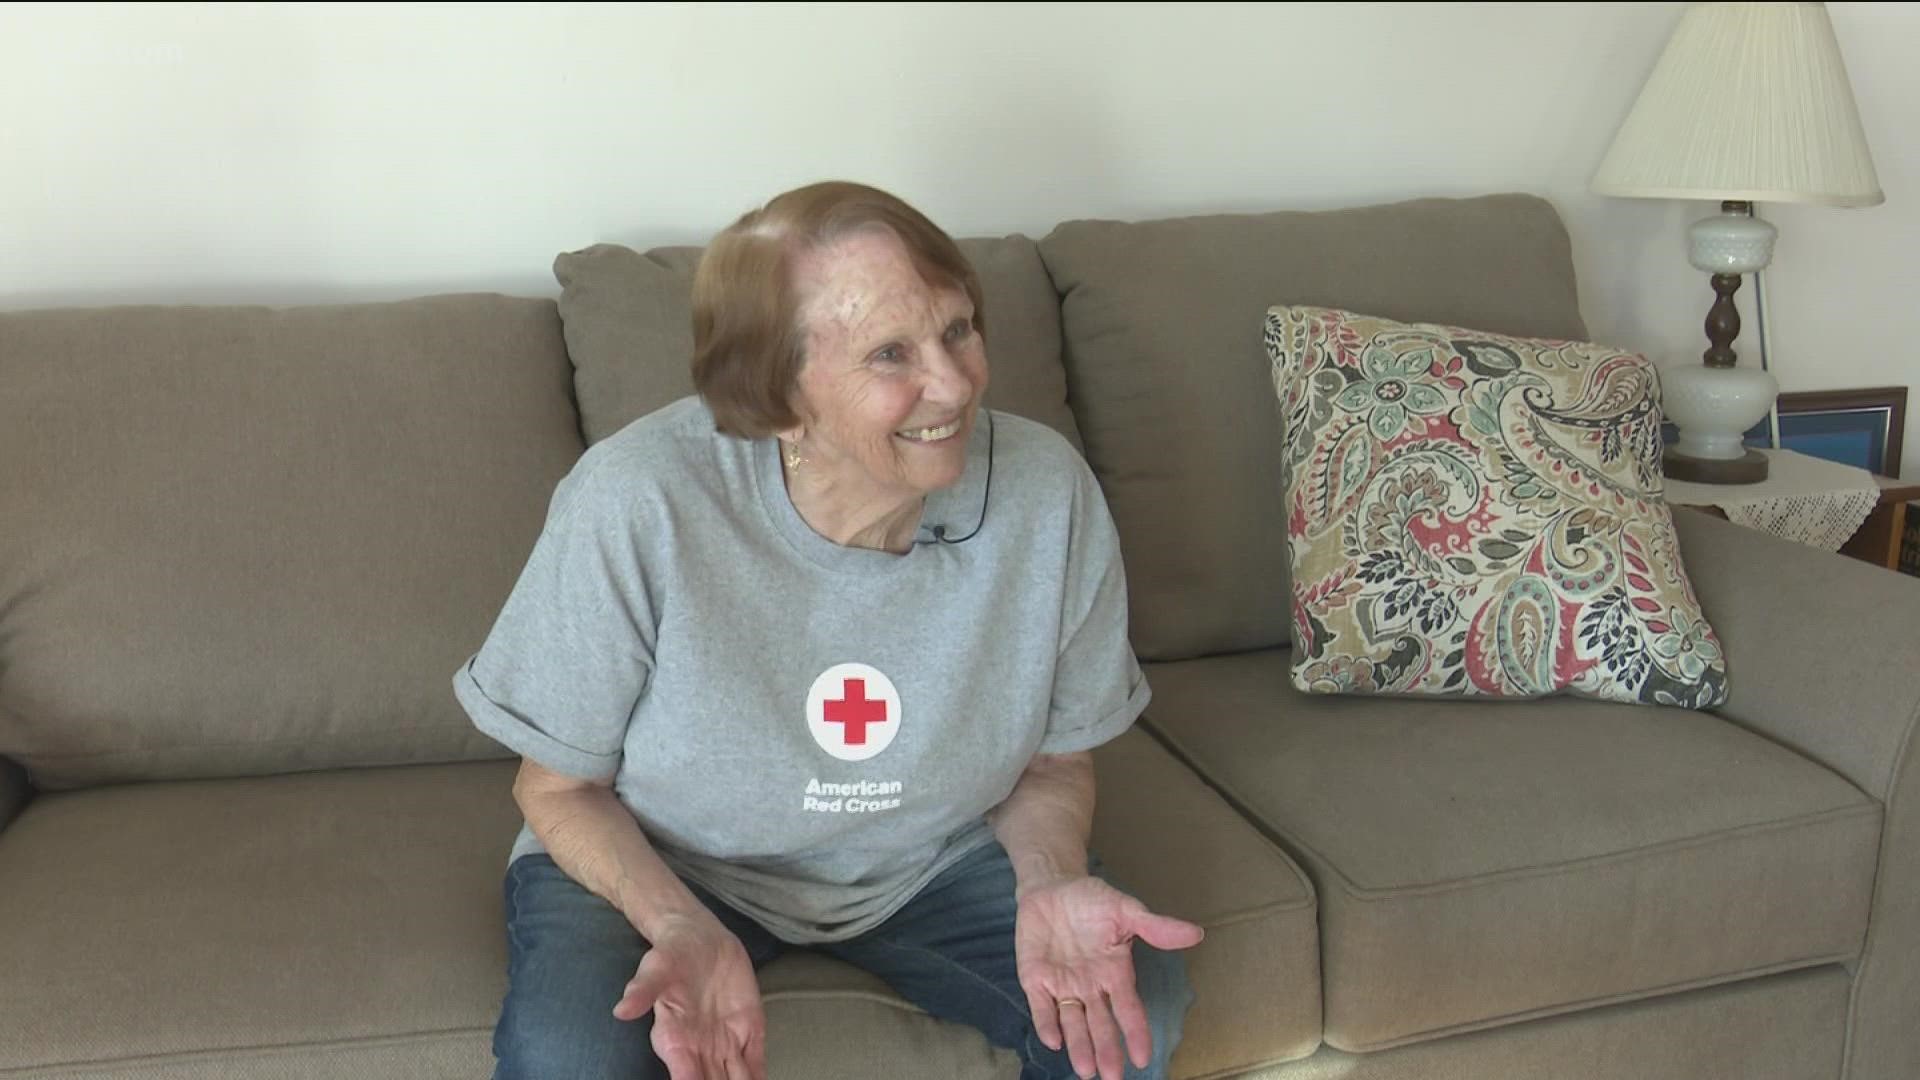 Judy Lucks, 80, started donating blood in 1983. Nearly four decades later, she travels every two weeks to the American Red Cross in Boise to donate blood platelets.